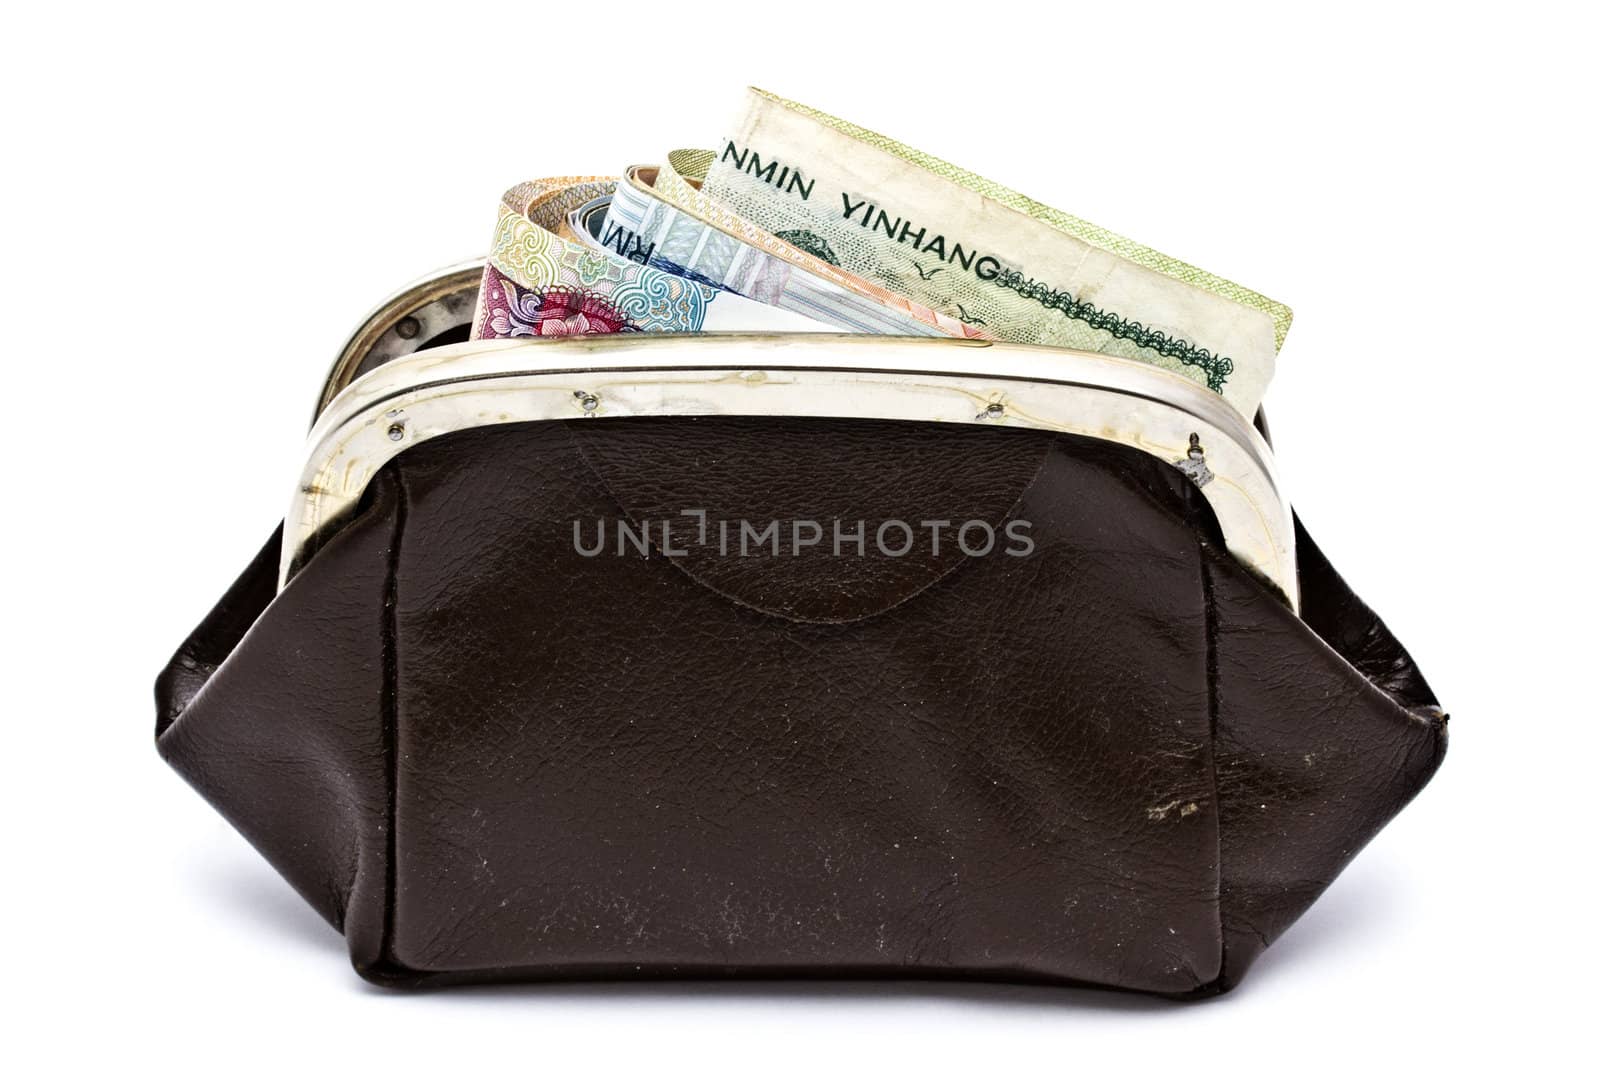 Different currency and purse by ibphoto